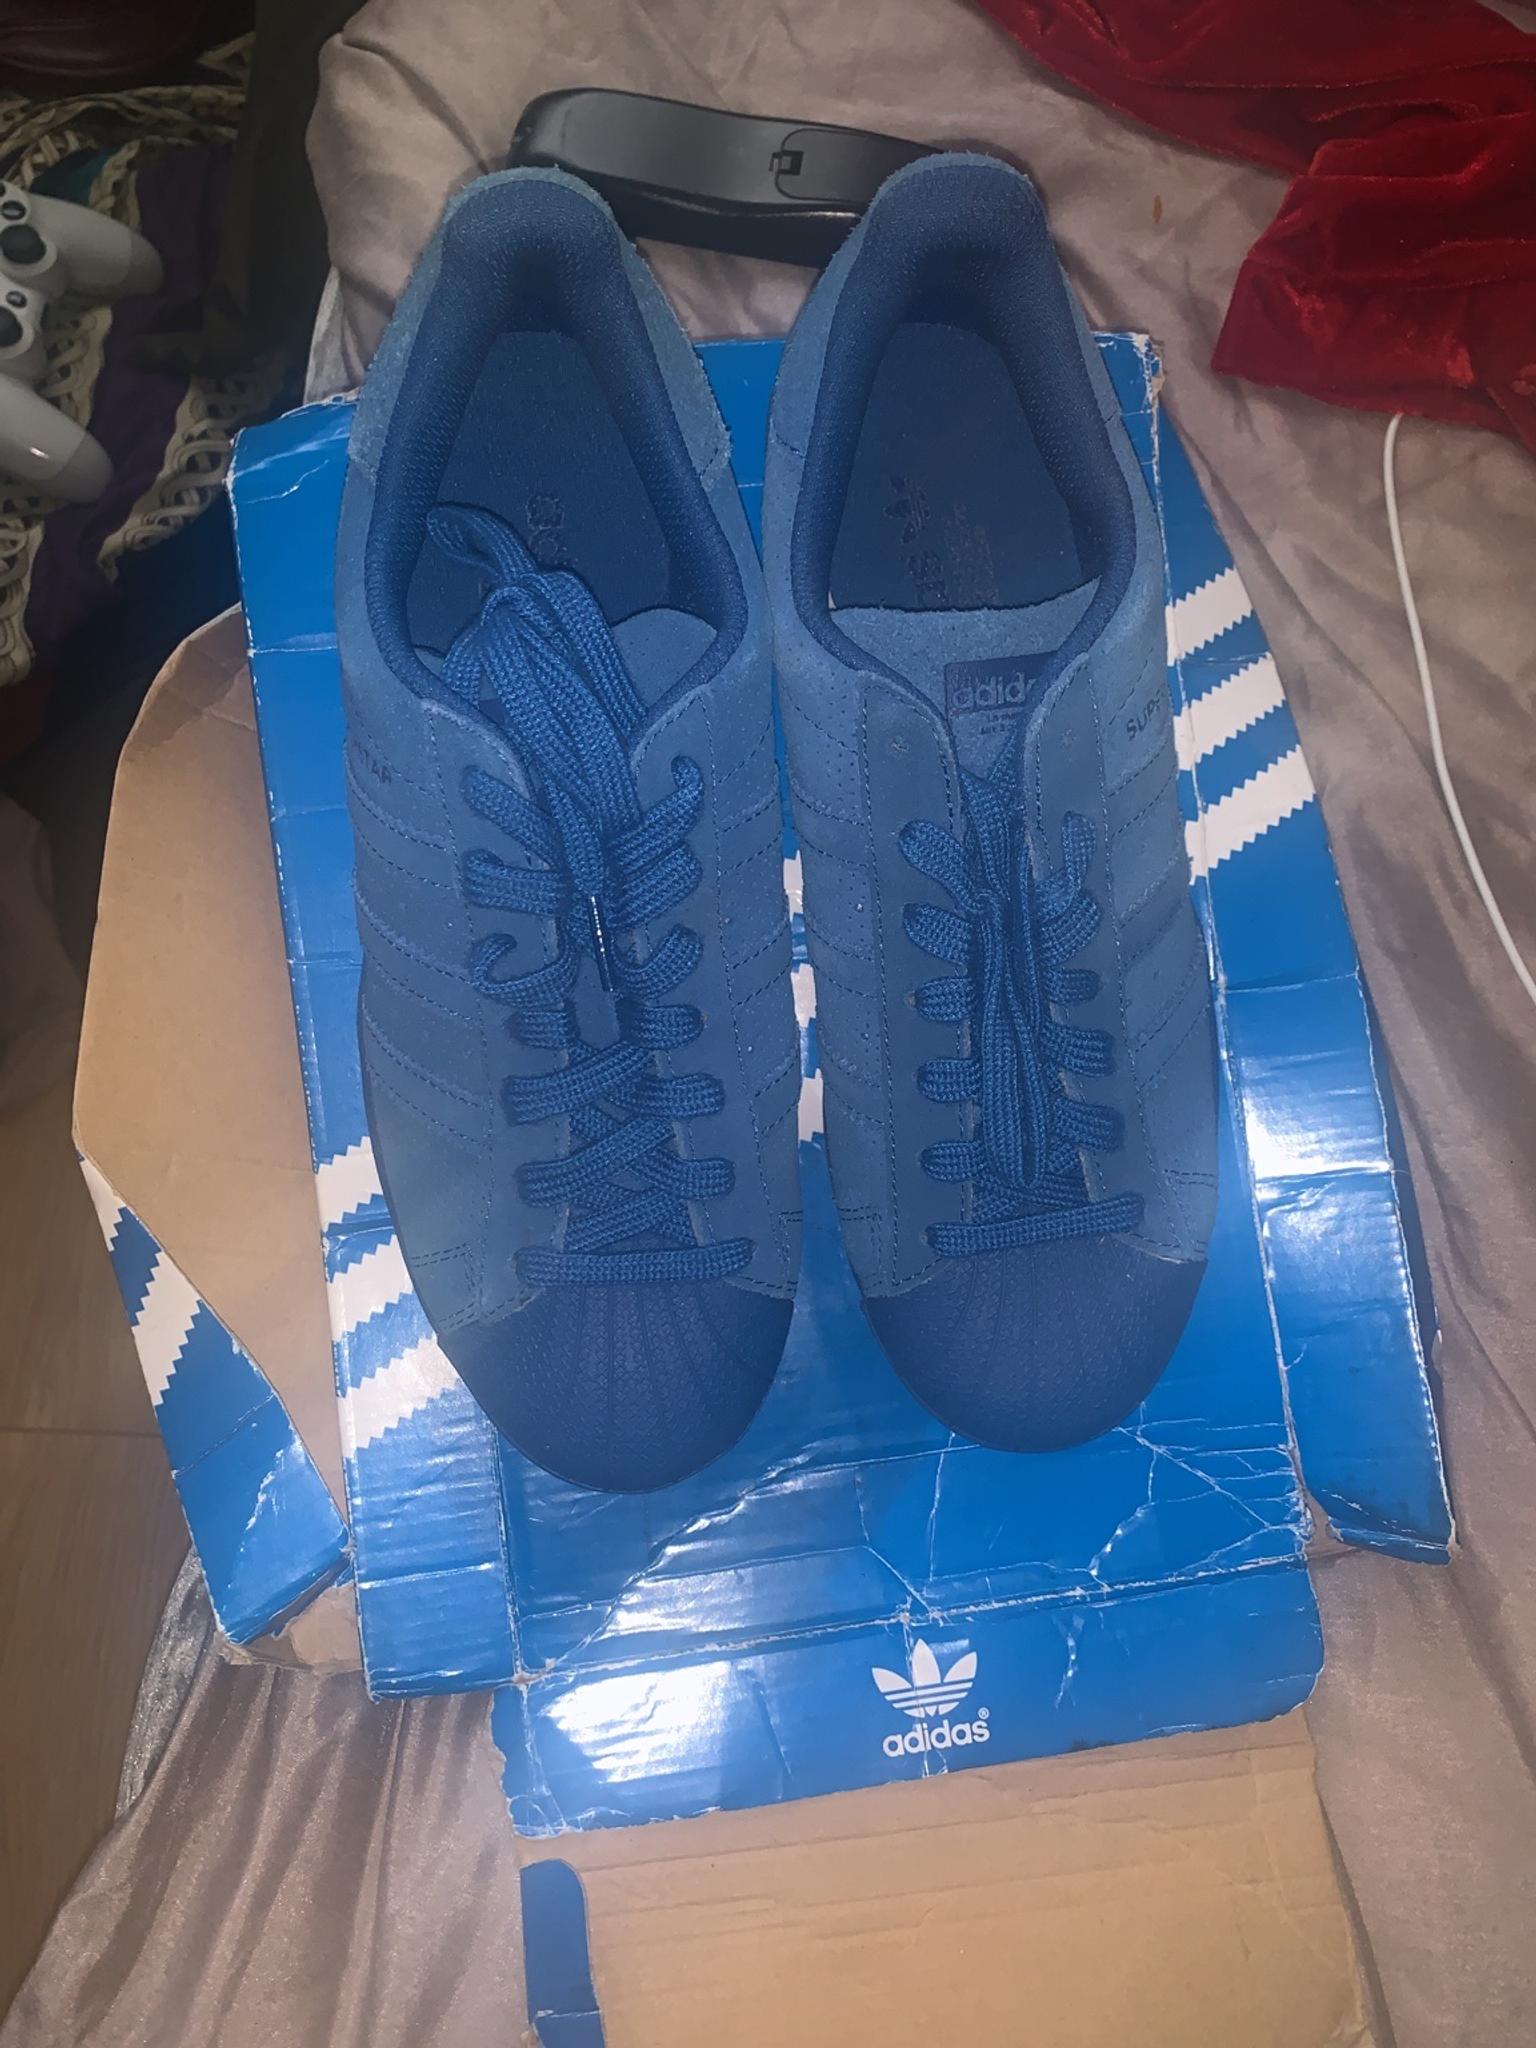 blue suede adidas trainers